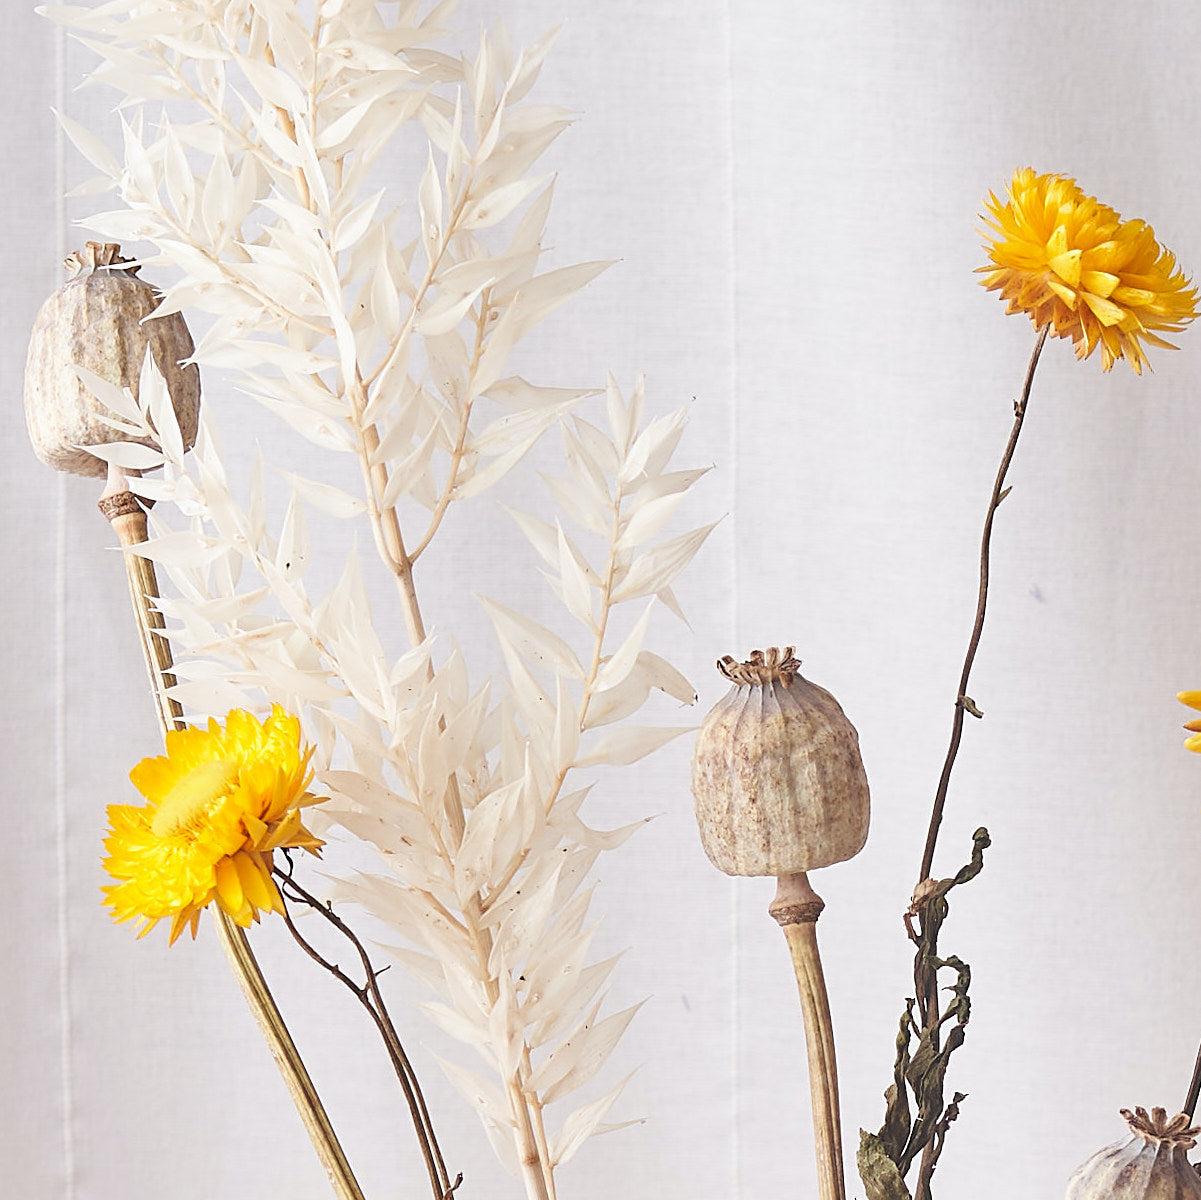 Dried flower bunch with yellow straw and poppy heads